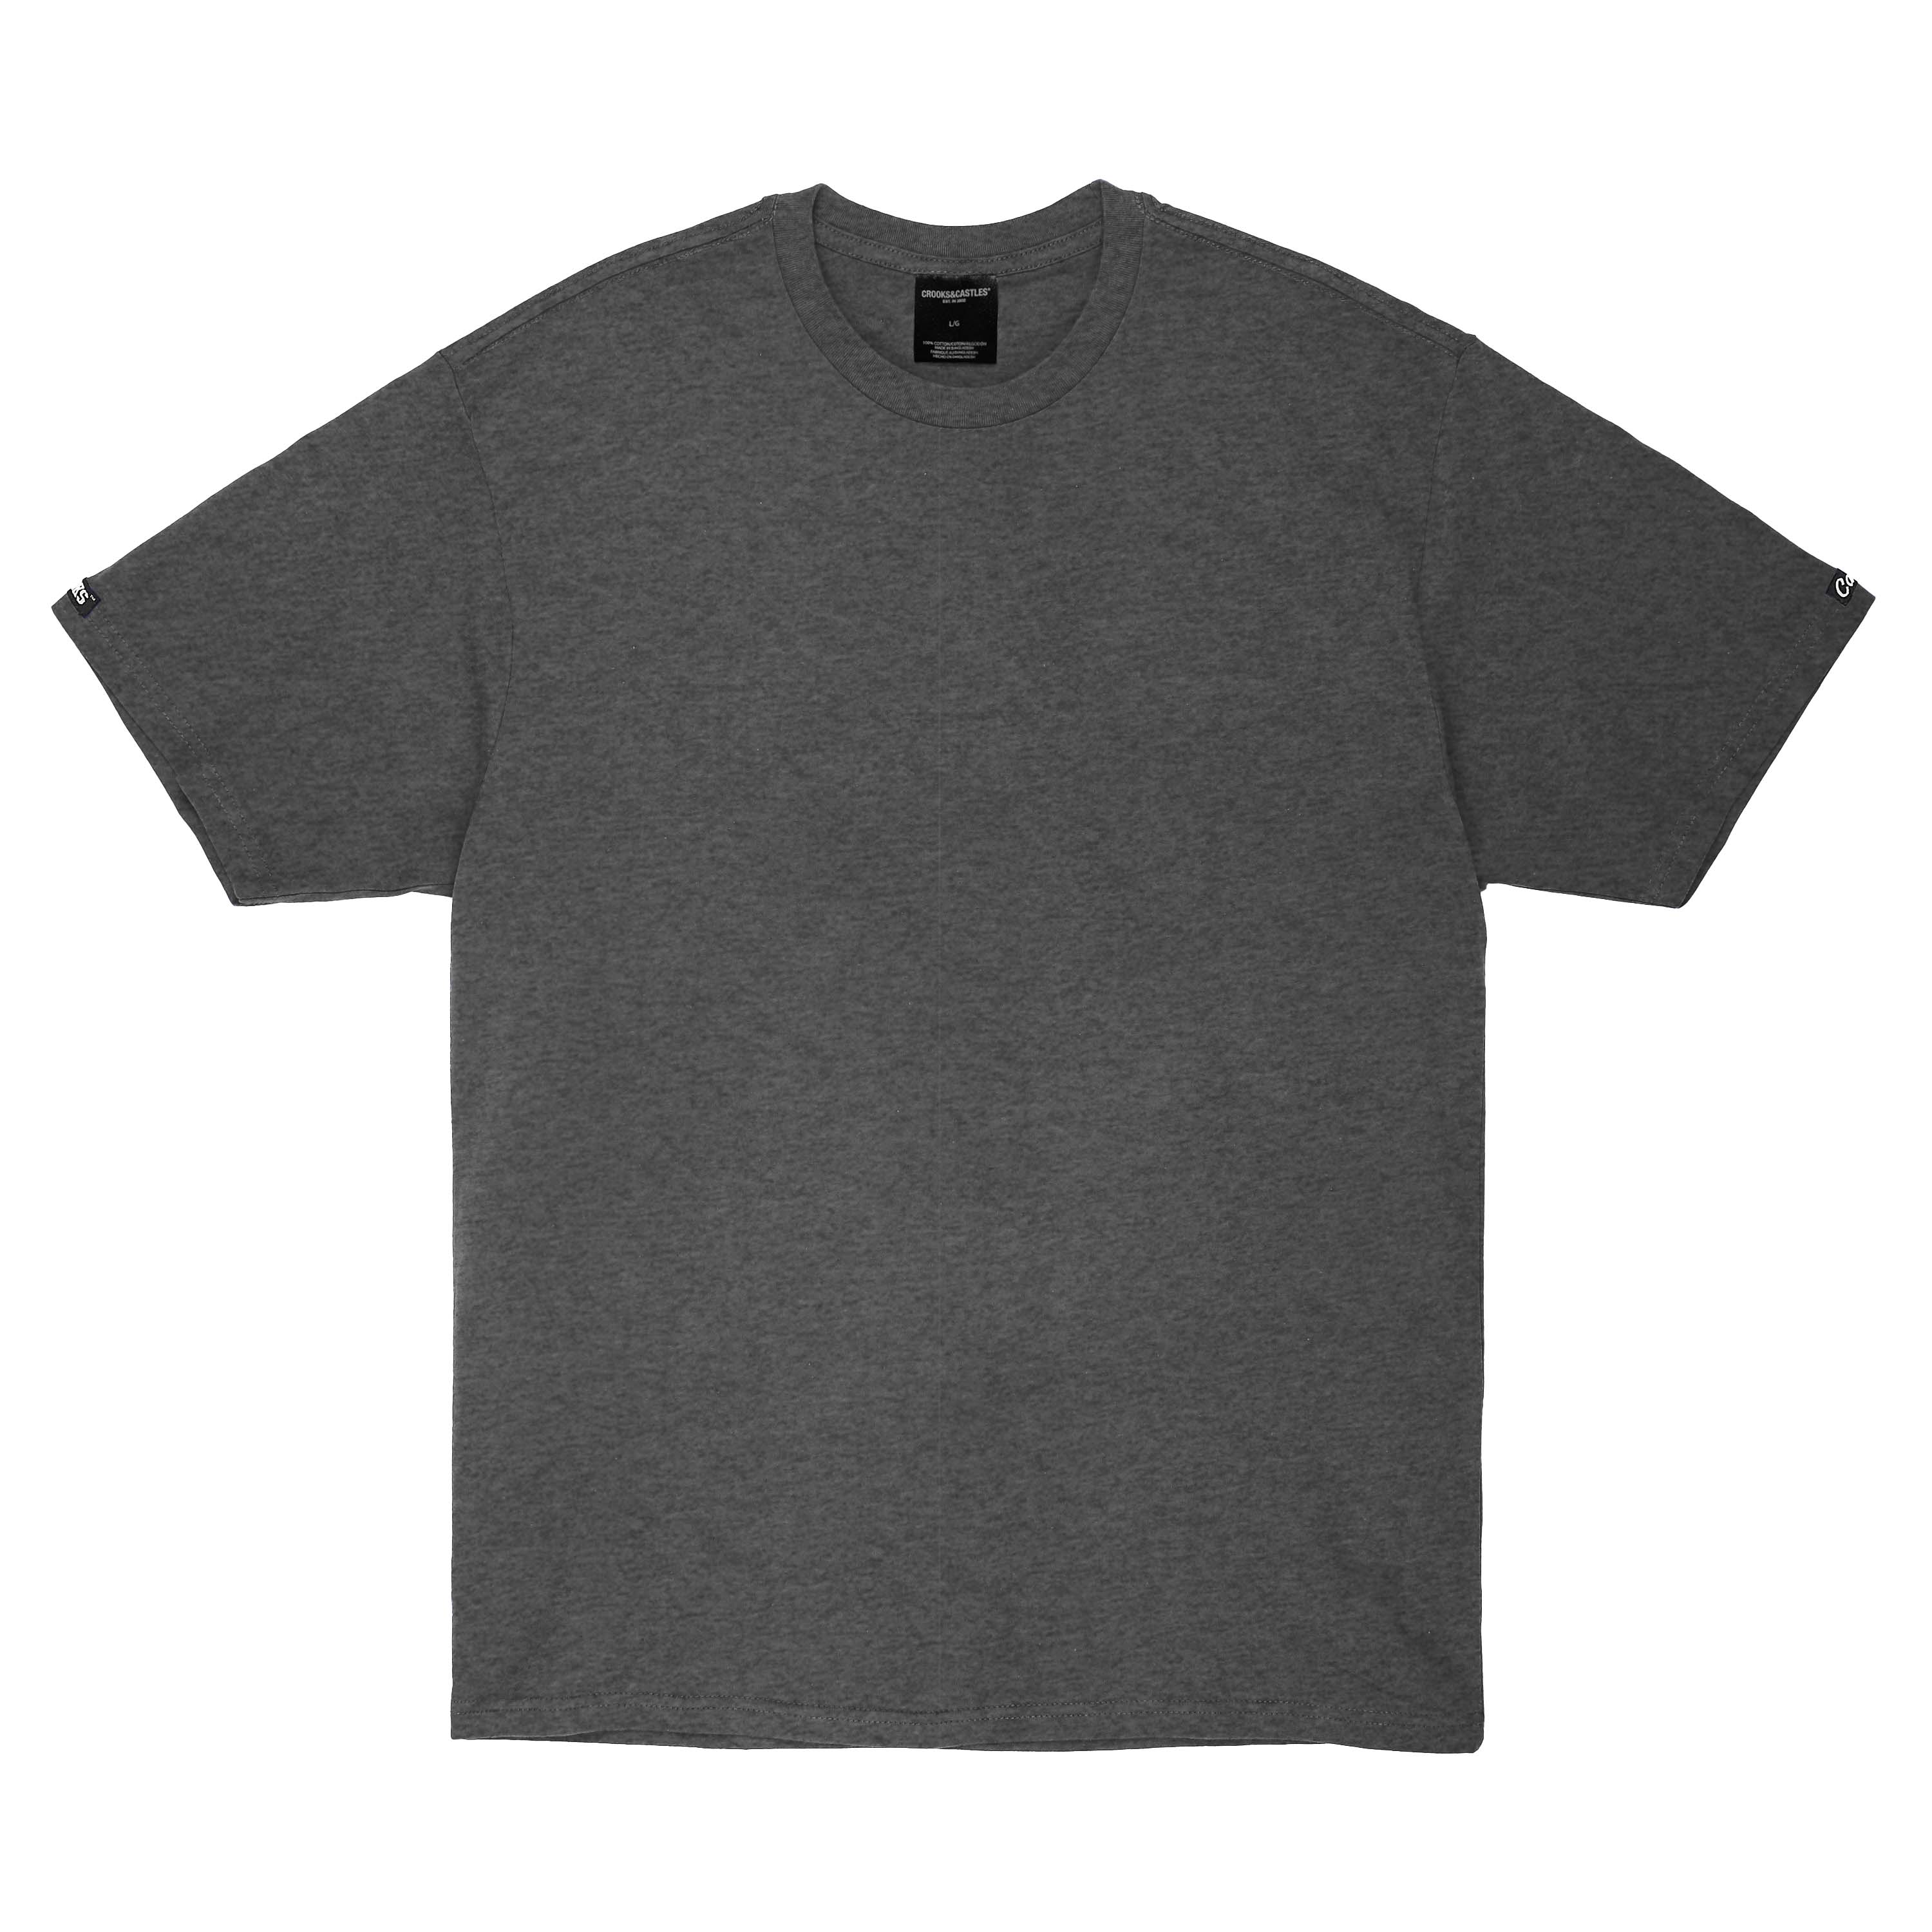 Essential Tee - Charcoal